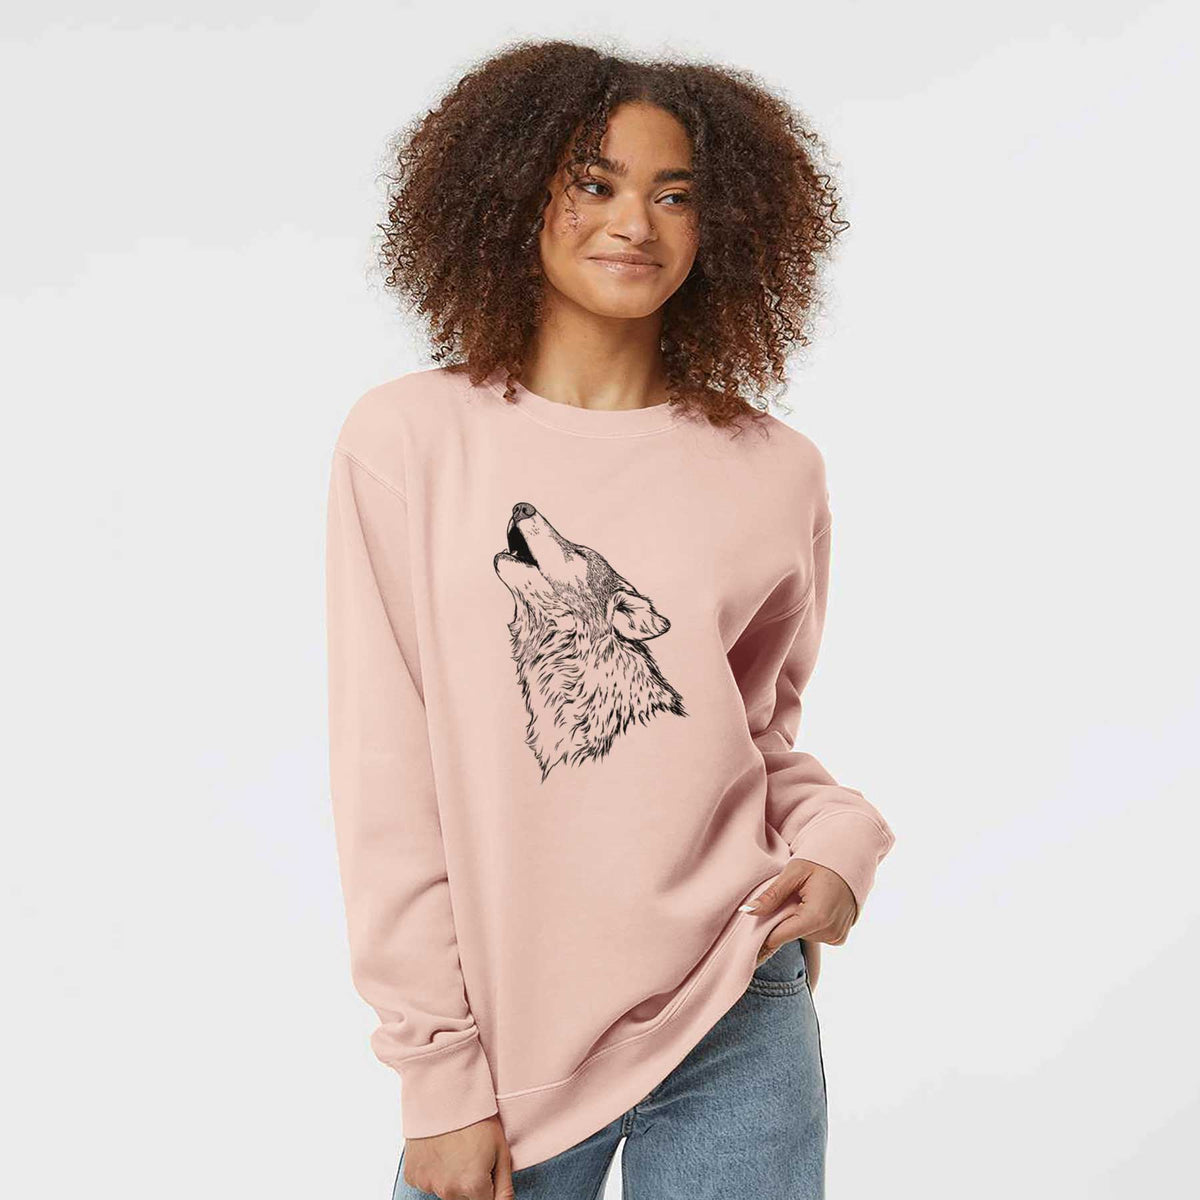 Canis lupus - Grey Wolf Howling - Unisex Pigment Dyed Crew Sweatshirt